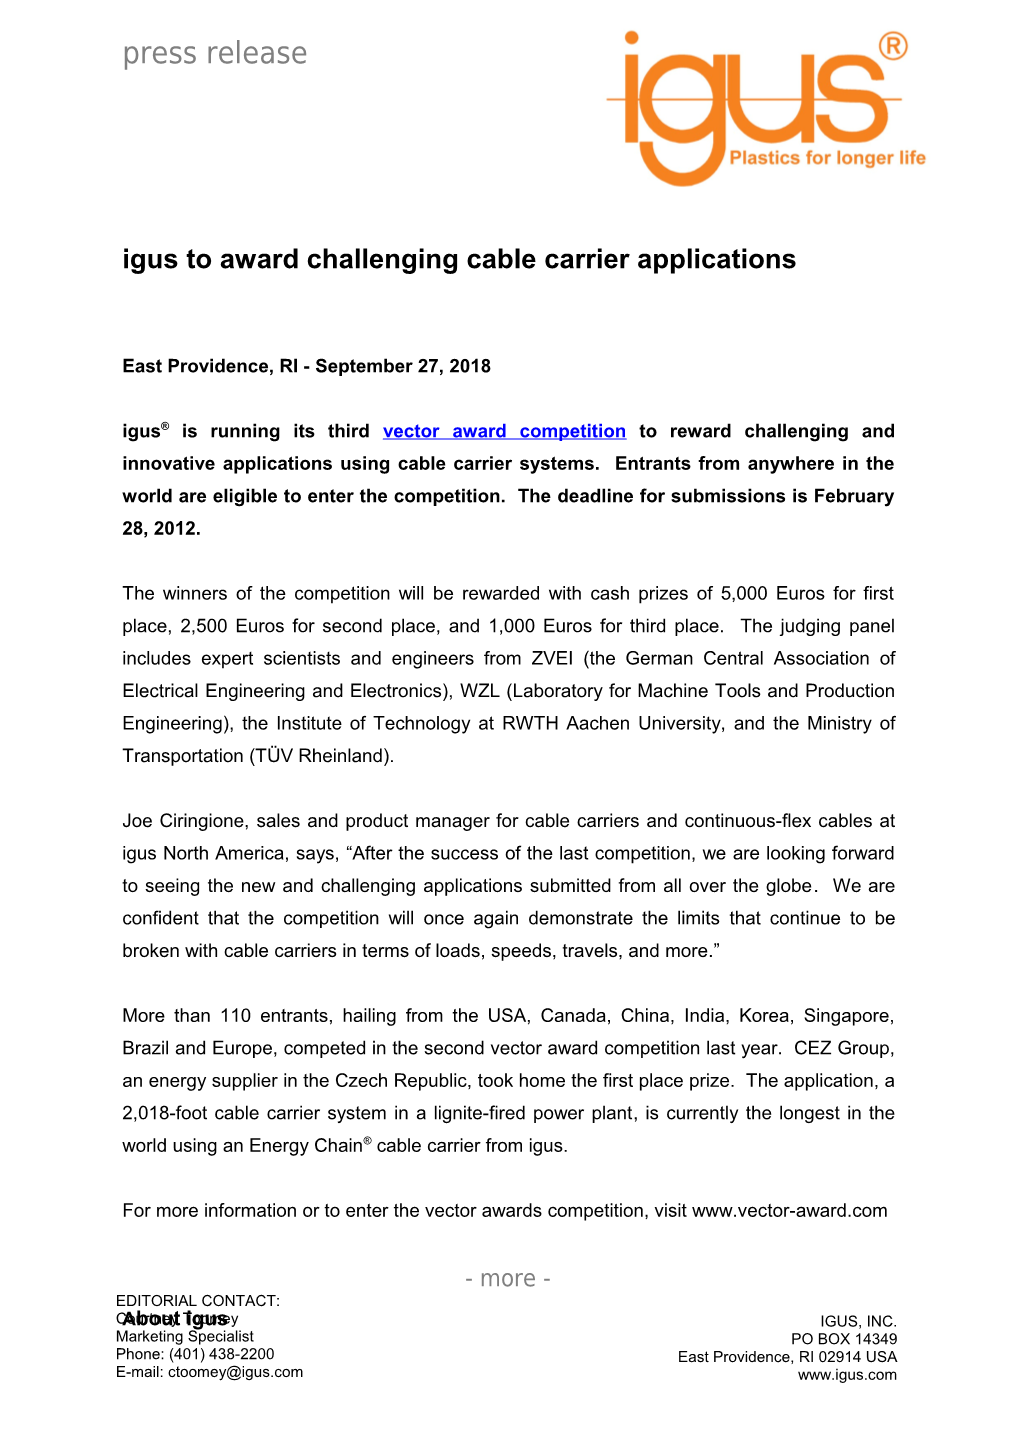 Igus to Award Challenging Cable Carrier Applications